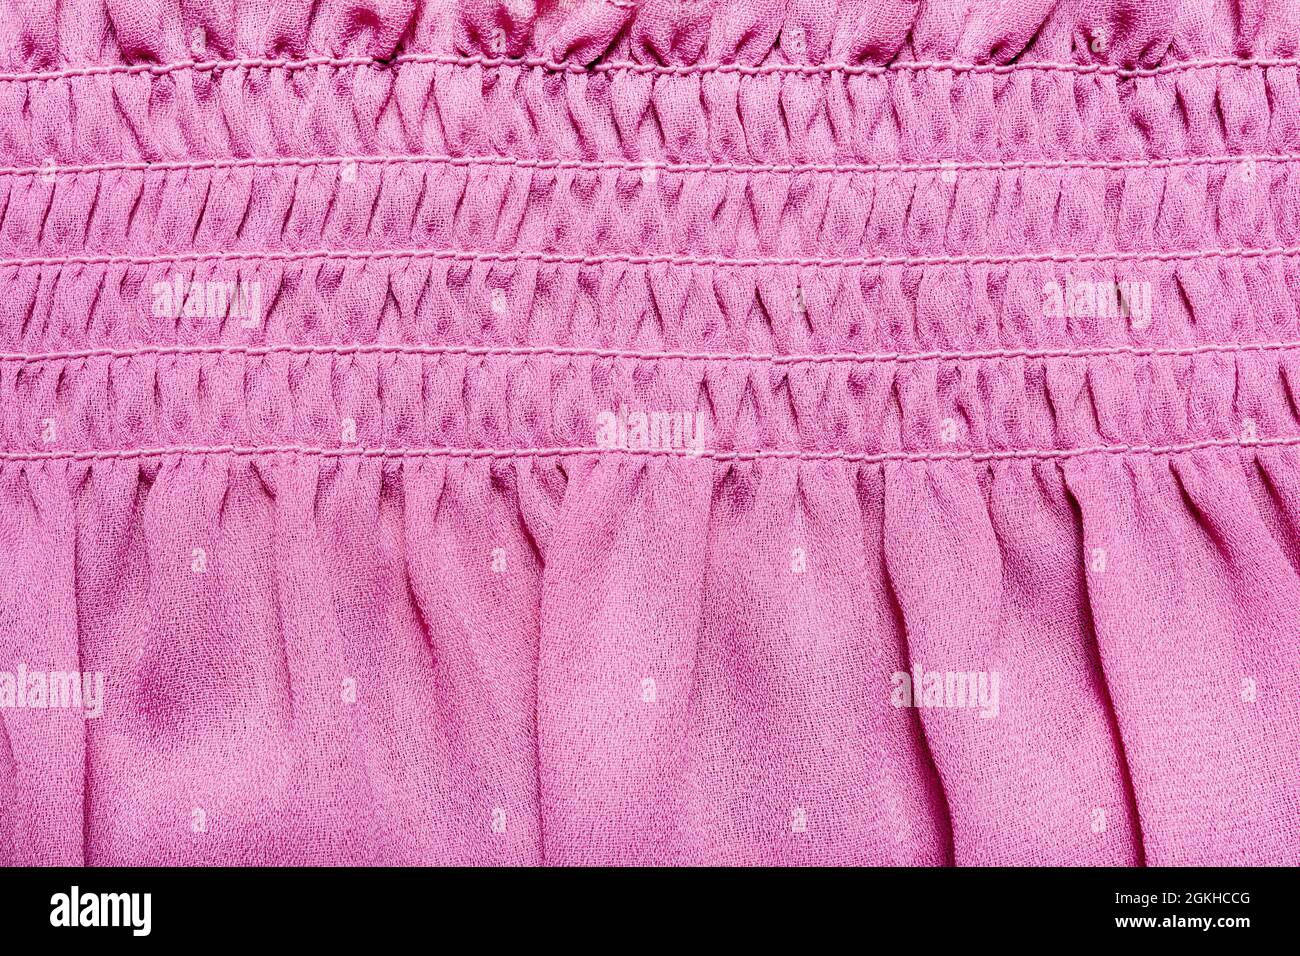 Texture backdrop photo of pink colored frill dress cloth fabric. Stock Photo